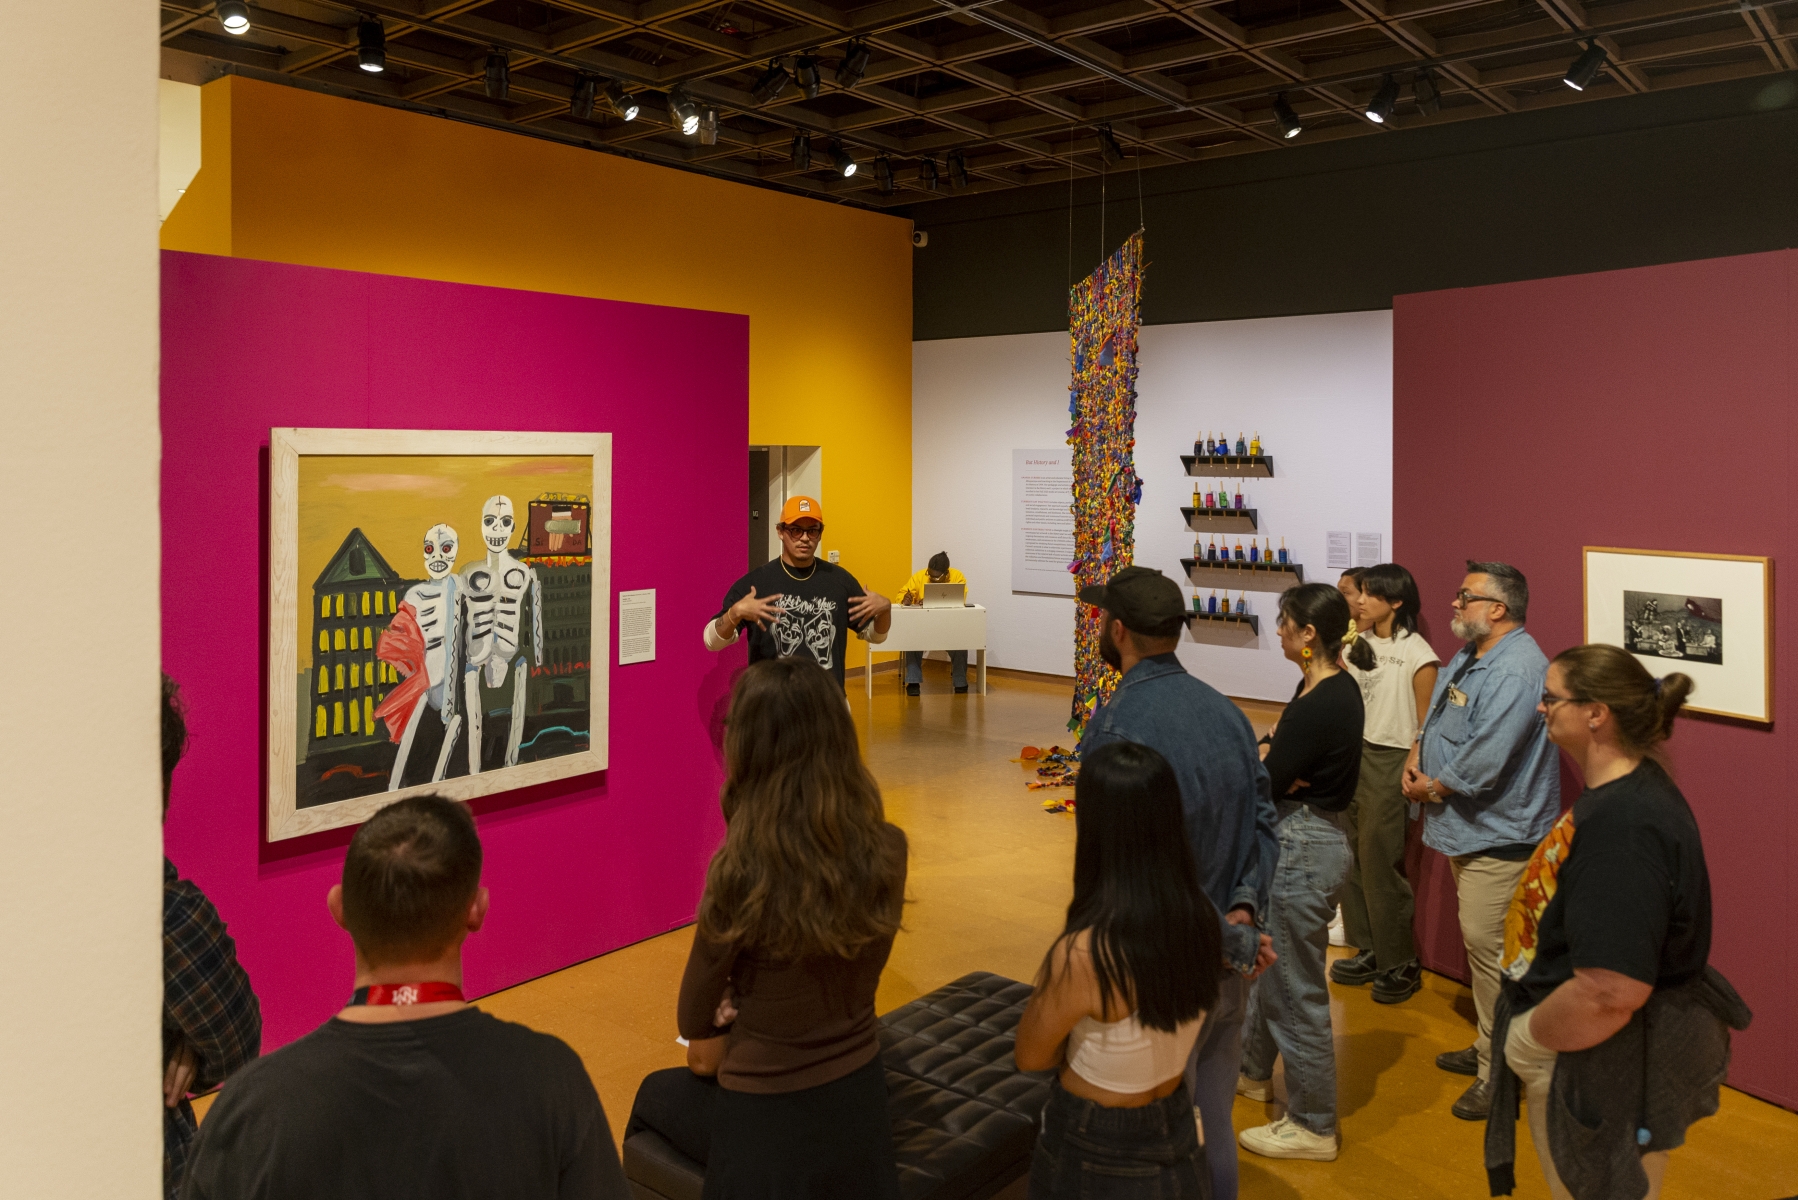 Ray Hernández-Durán's class “Chicano and Latinx Art” gives presentations in "Hindsight Insight 3.0"